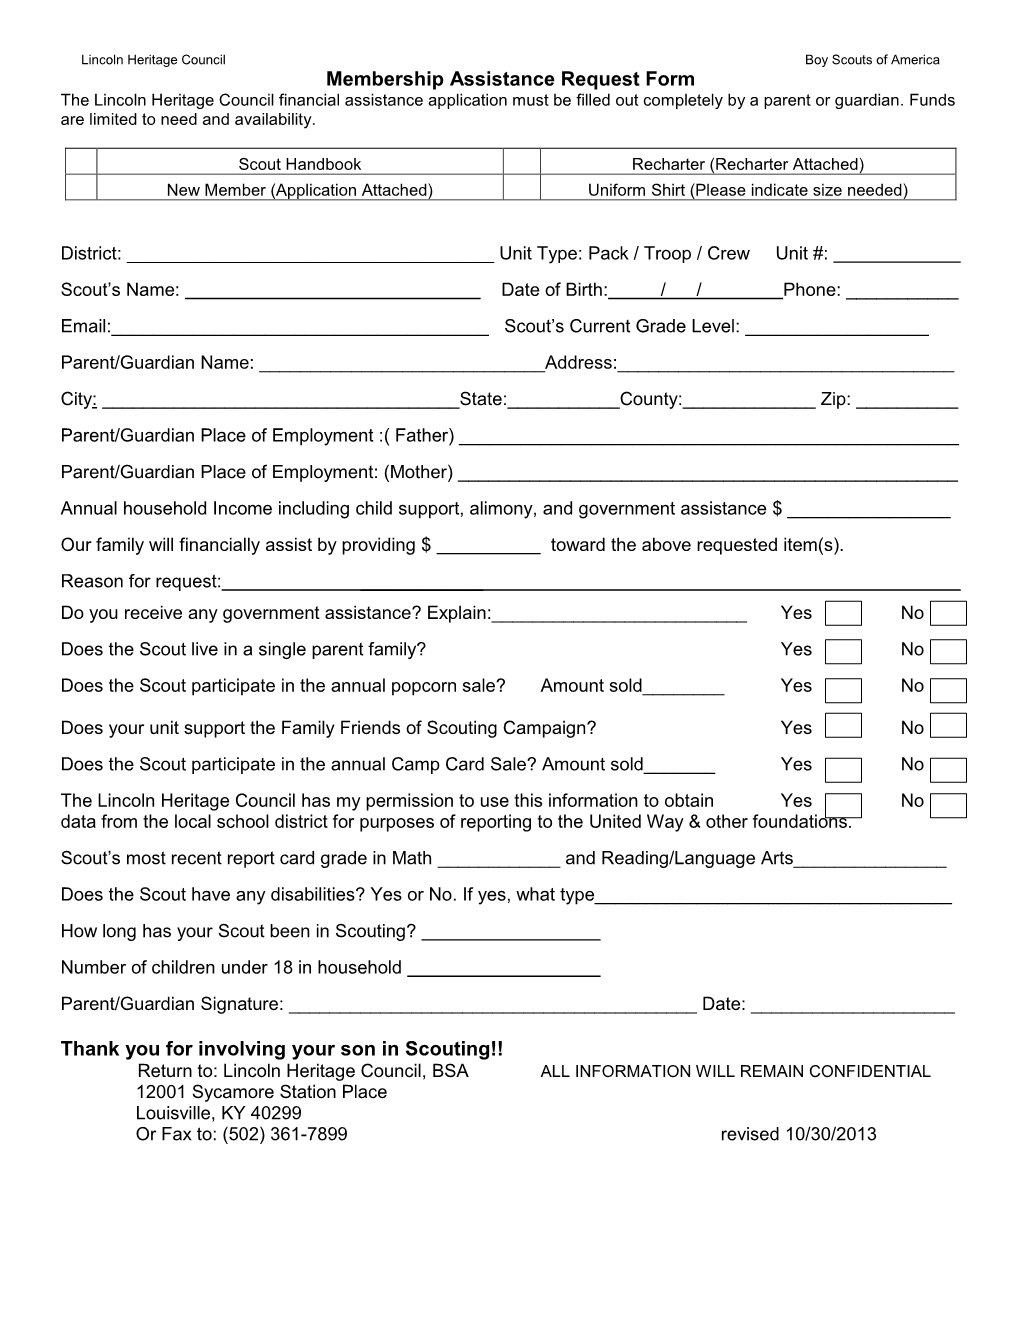 Membership Assistance Request Form the Lincoln Heritage Council Financial Assistance Application Must Be Filled out Completely by a Parent Or Guardian